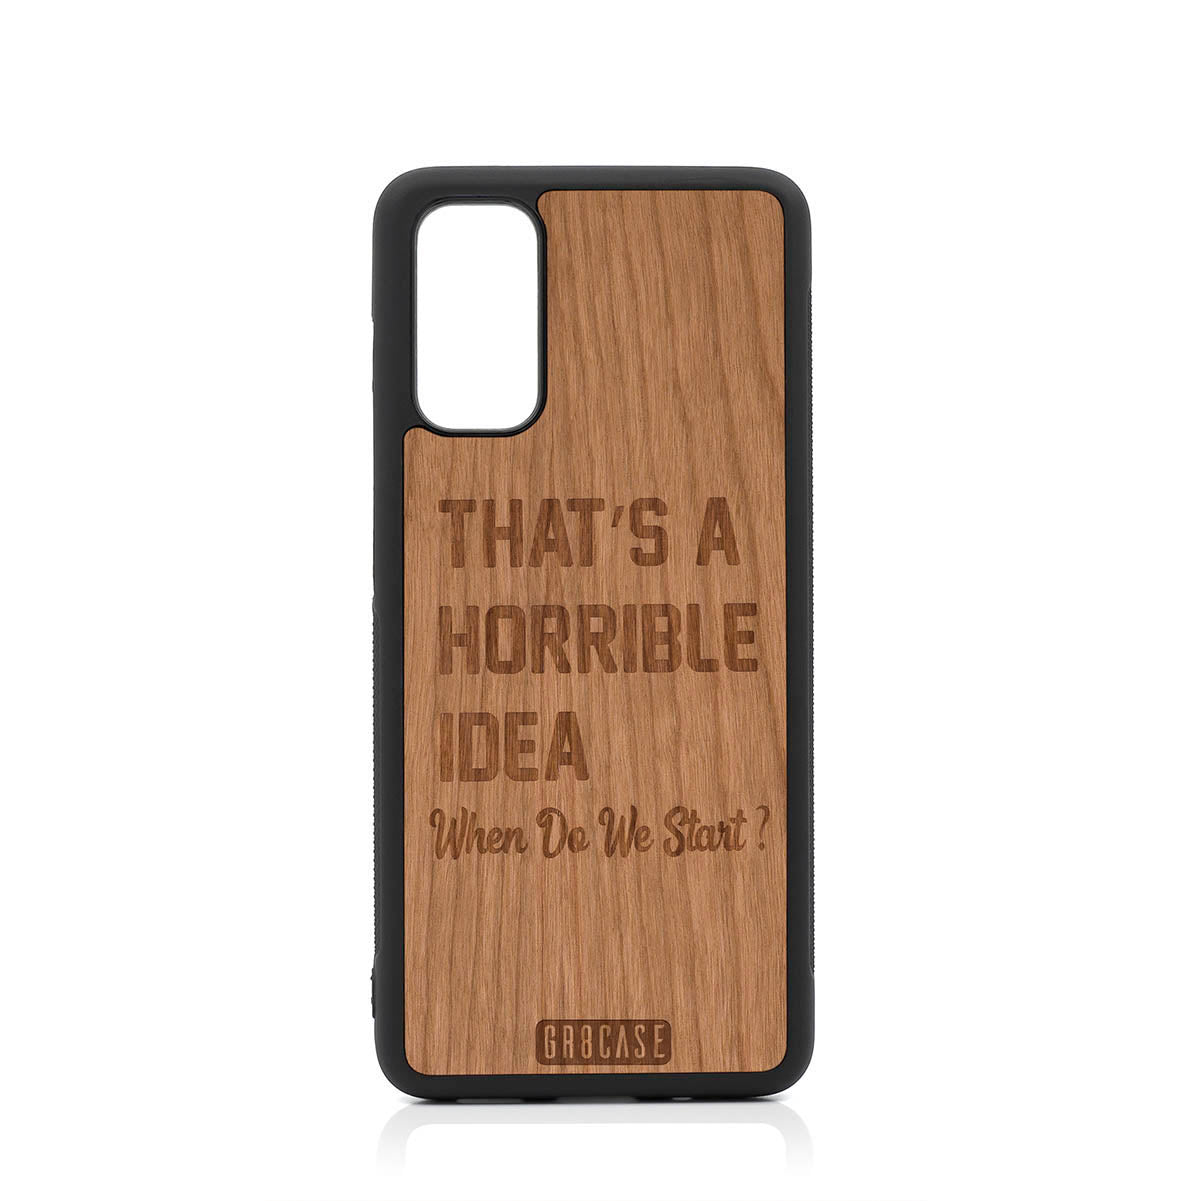 That's A Horrible Idea When Do We Start? Design Wood Case For Samsung Galaxy S20